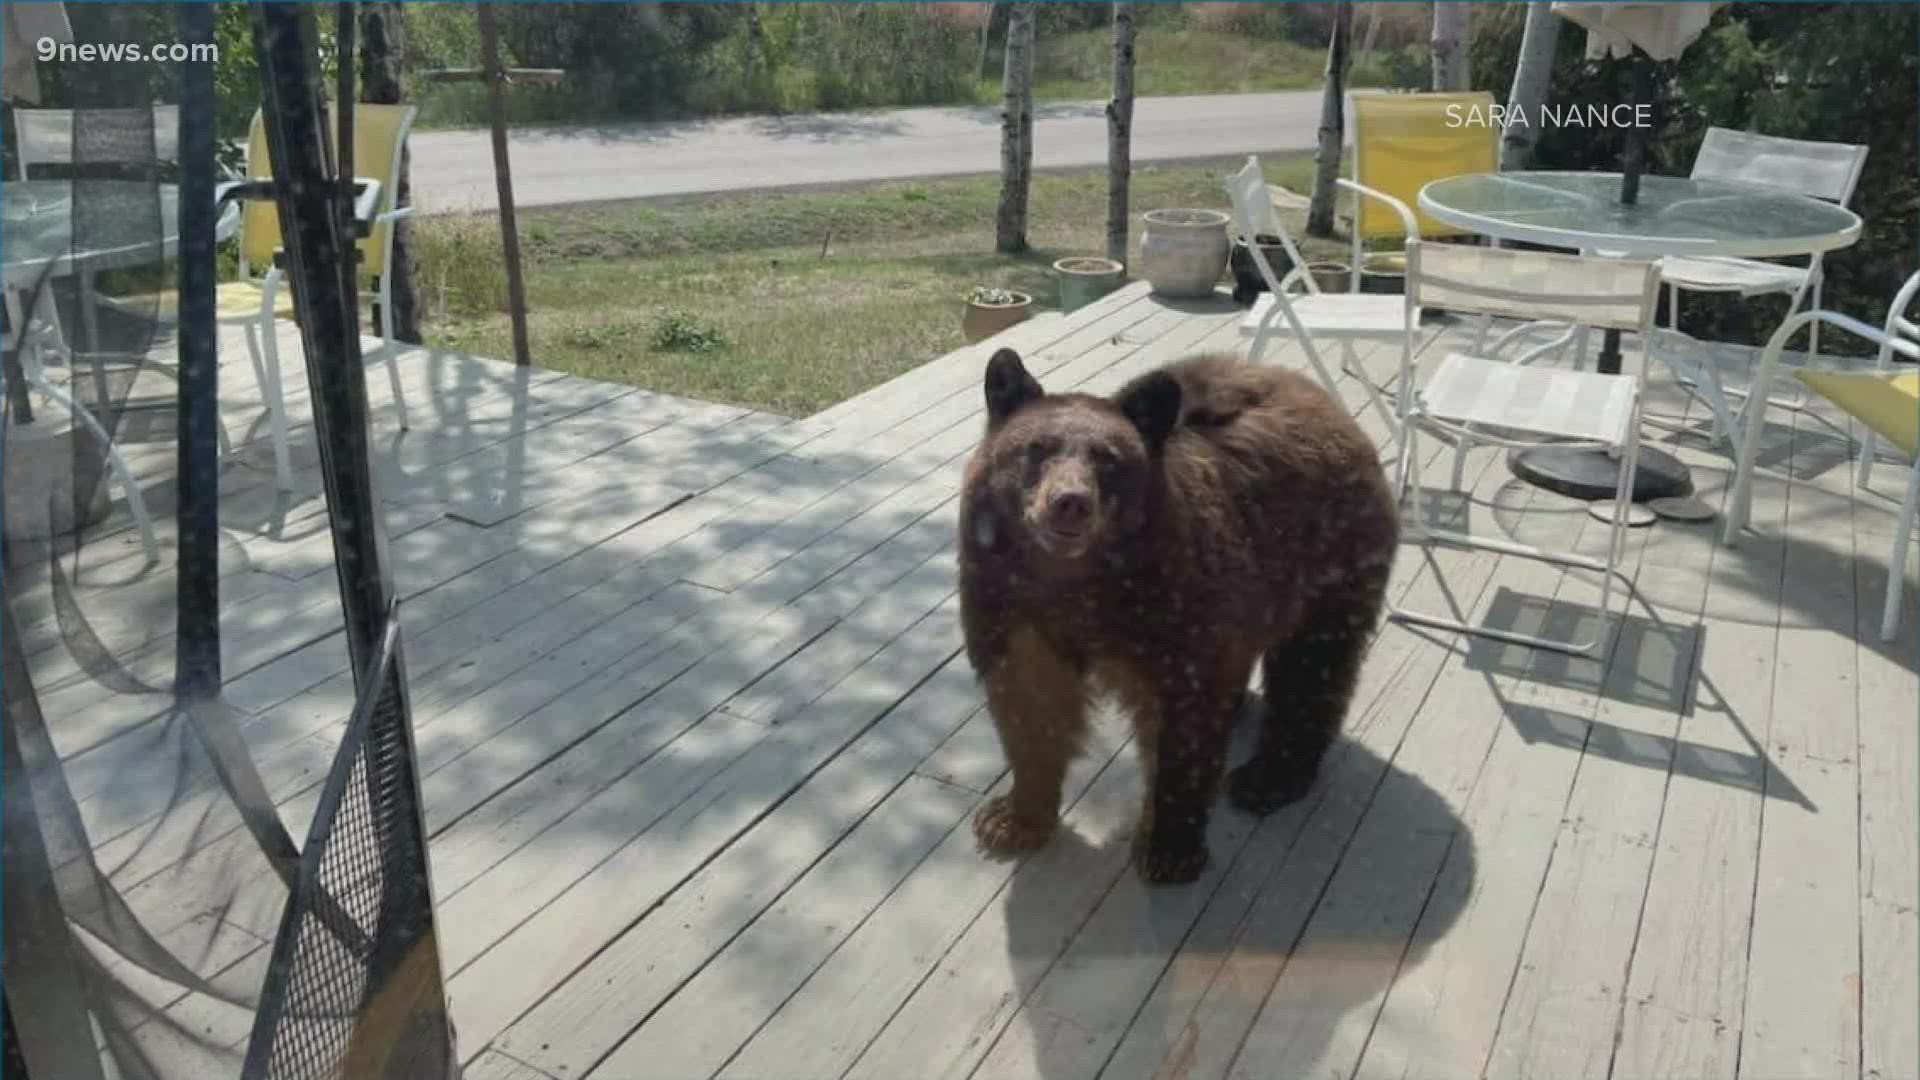 Colorado Parks and Wildlife has already euthanized two bears that kept breaking into homes.